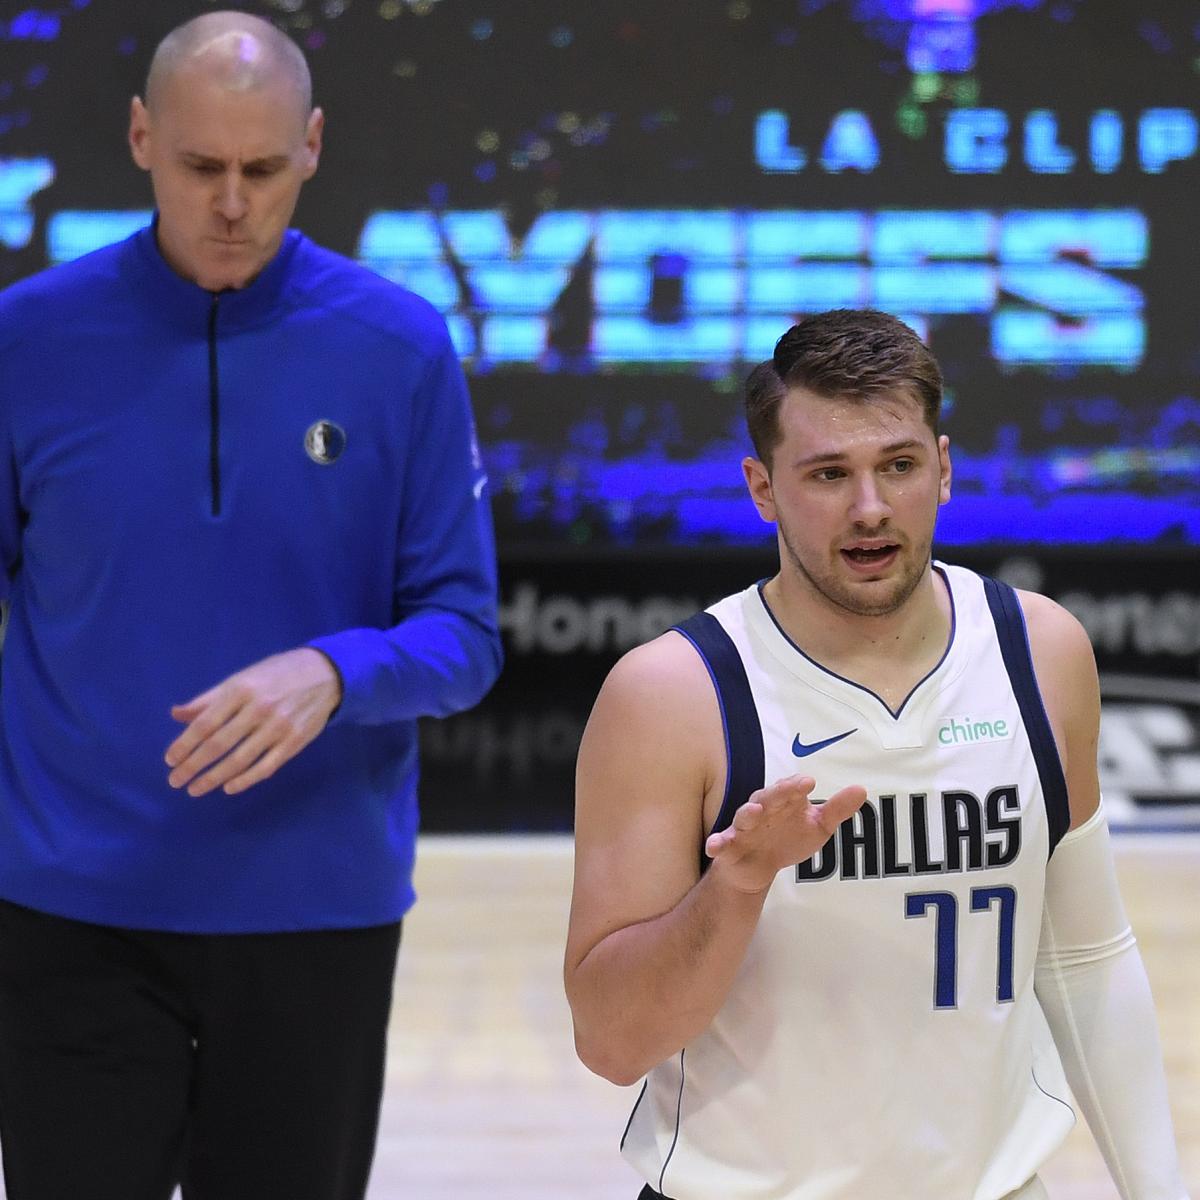 Rick Carlisle Says He Expects Mavs’ Luka Doncic to Steal NBA Title, A pair of MVPs